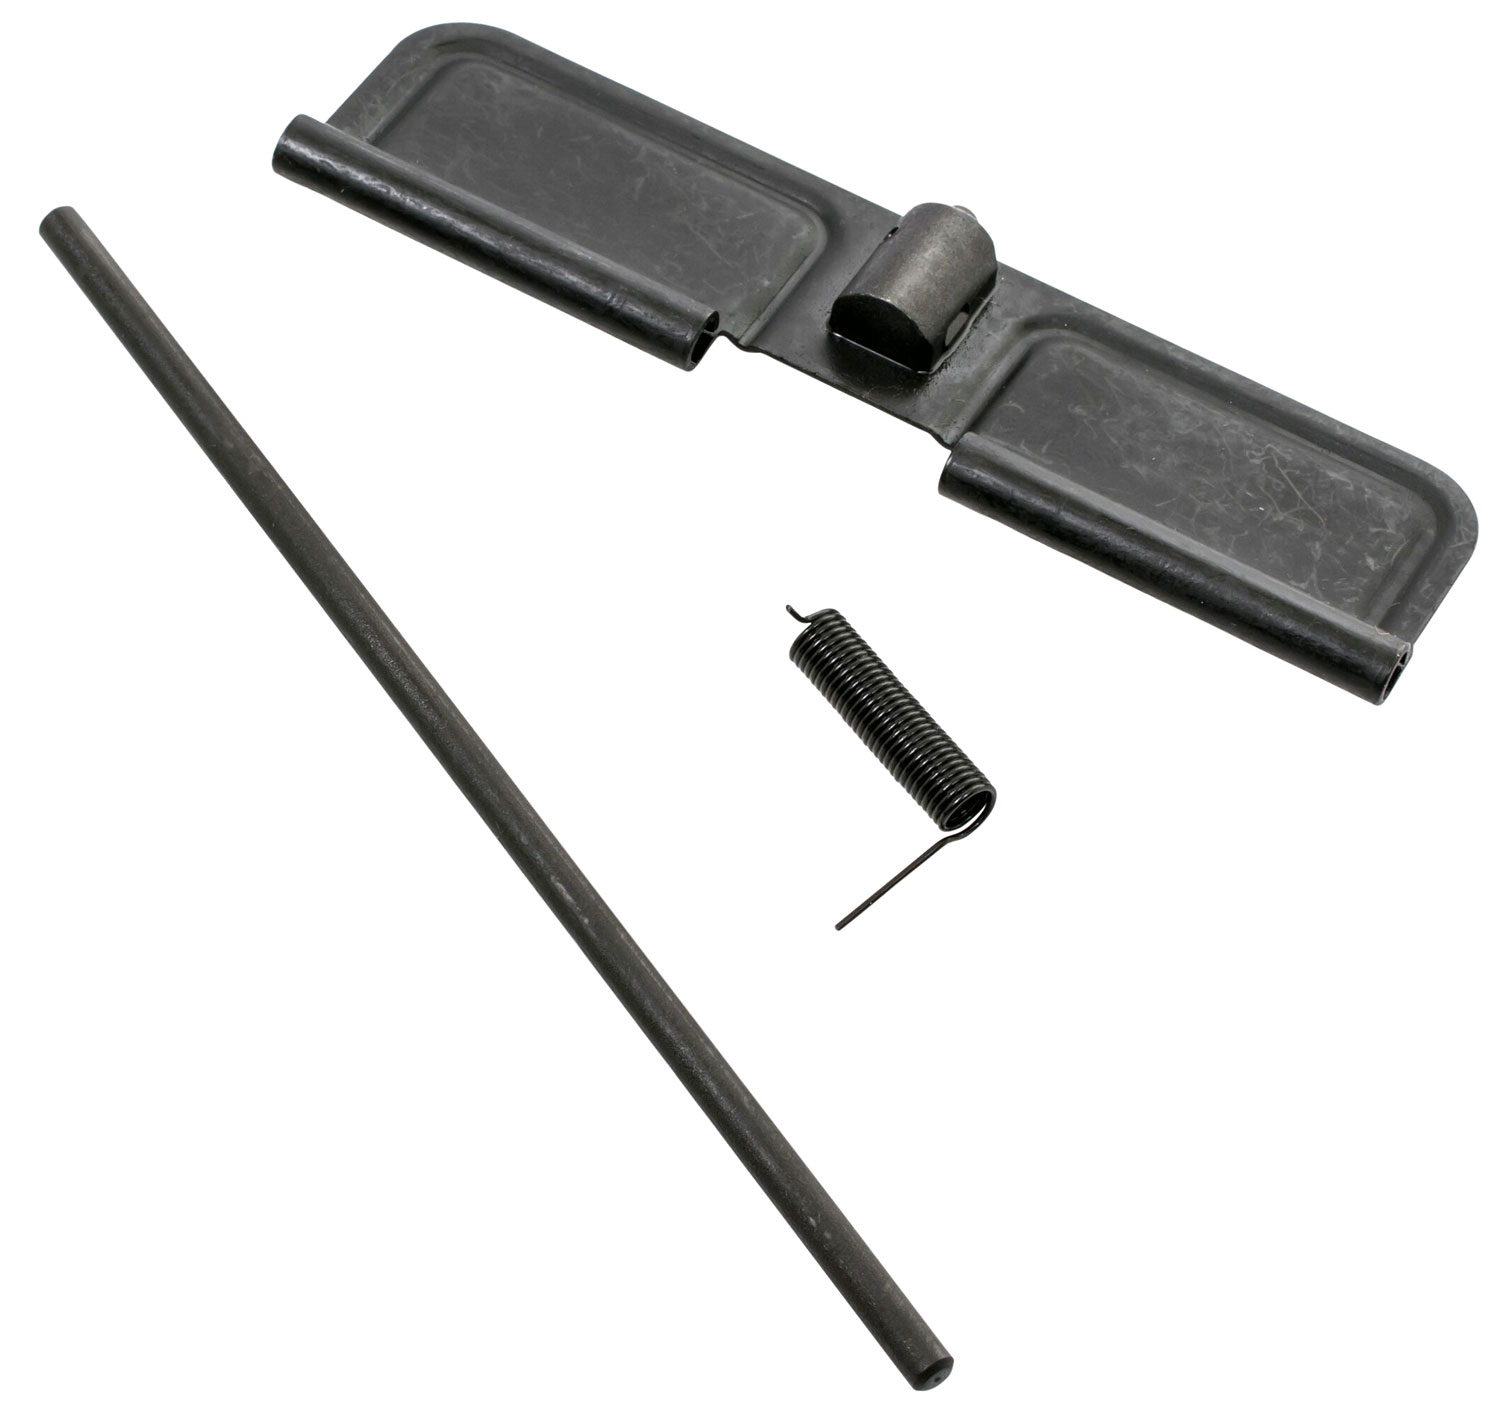 CMMG 38BA538 Mk3 Ejection Port Cover Kit 308 Win Black